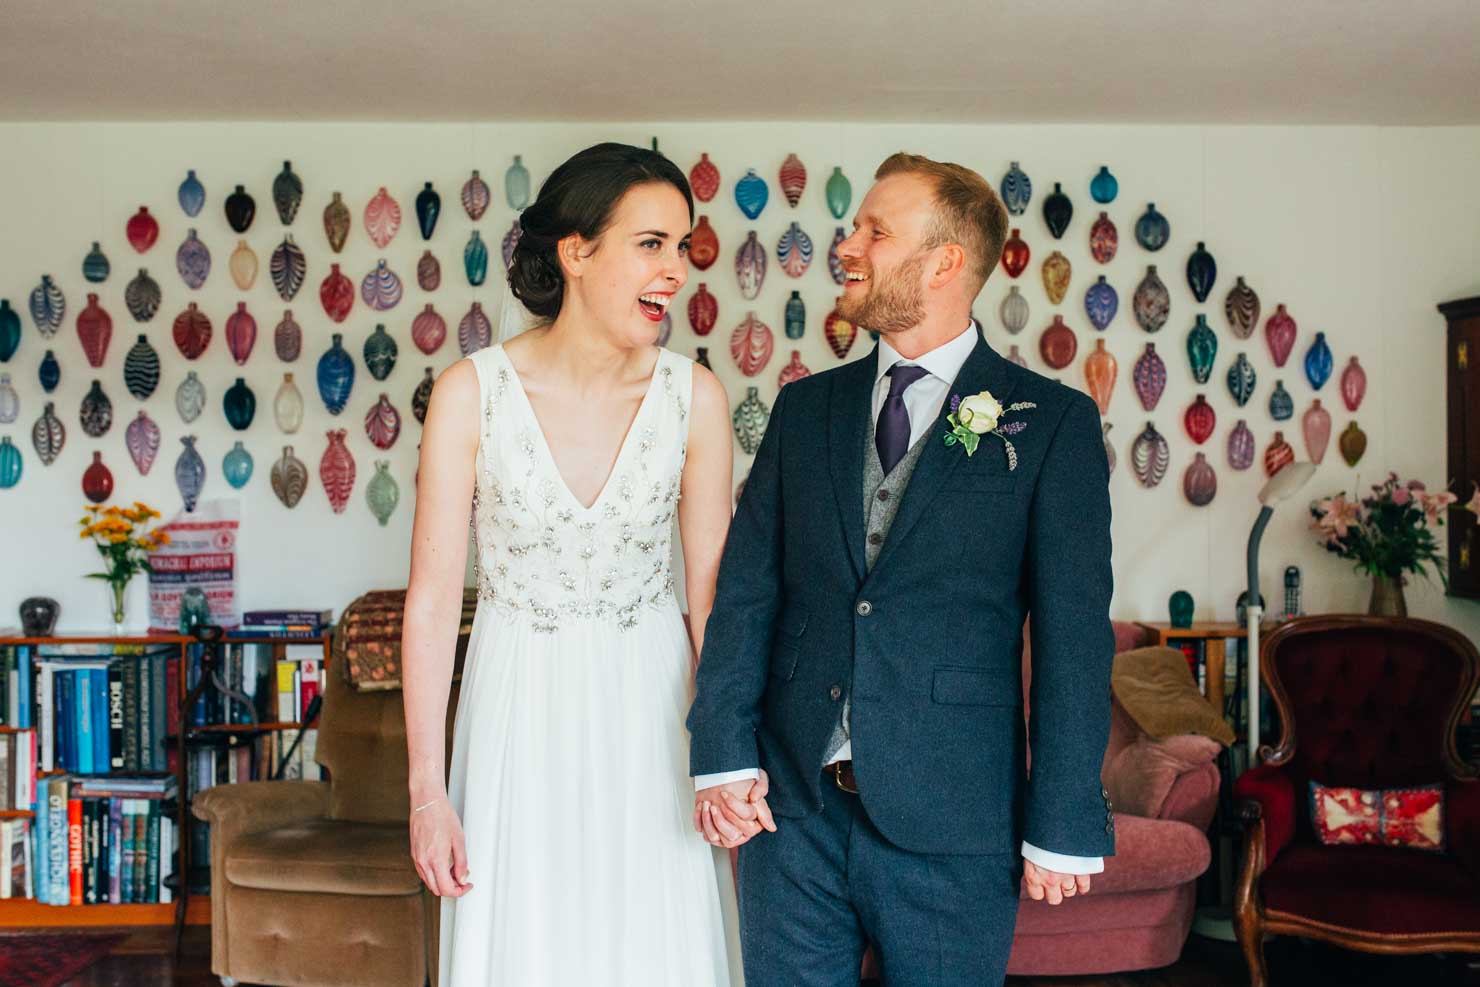 indoor couples portraits at home for bride and groom wedding photography in suffolk